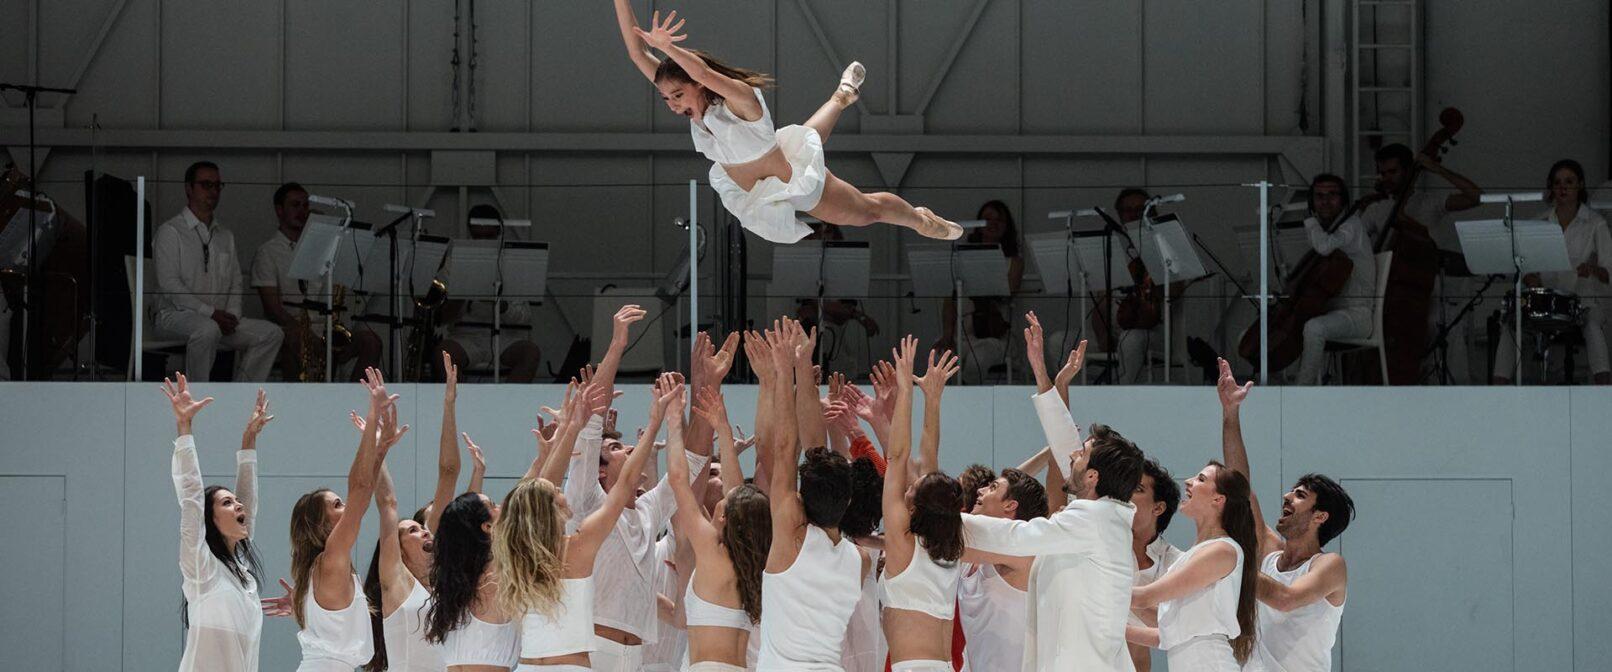 Paris Opera Ballet - Play. Large group of dancers dressed in white clothing stand in a group, a female dancer in white is thrown in the air by the group.